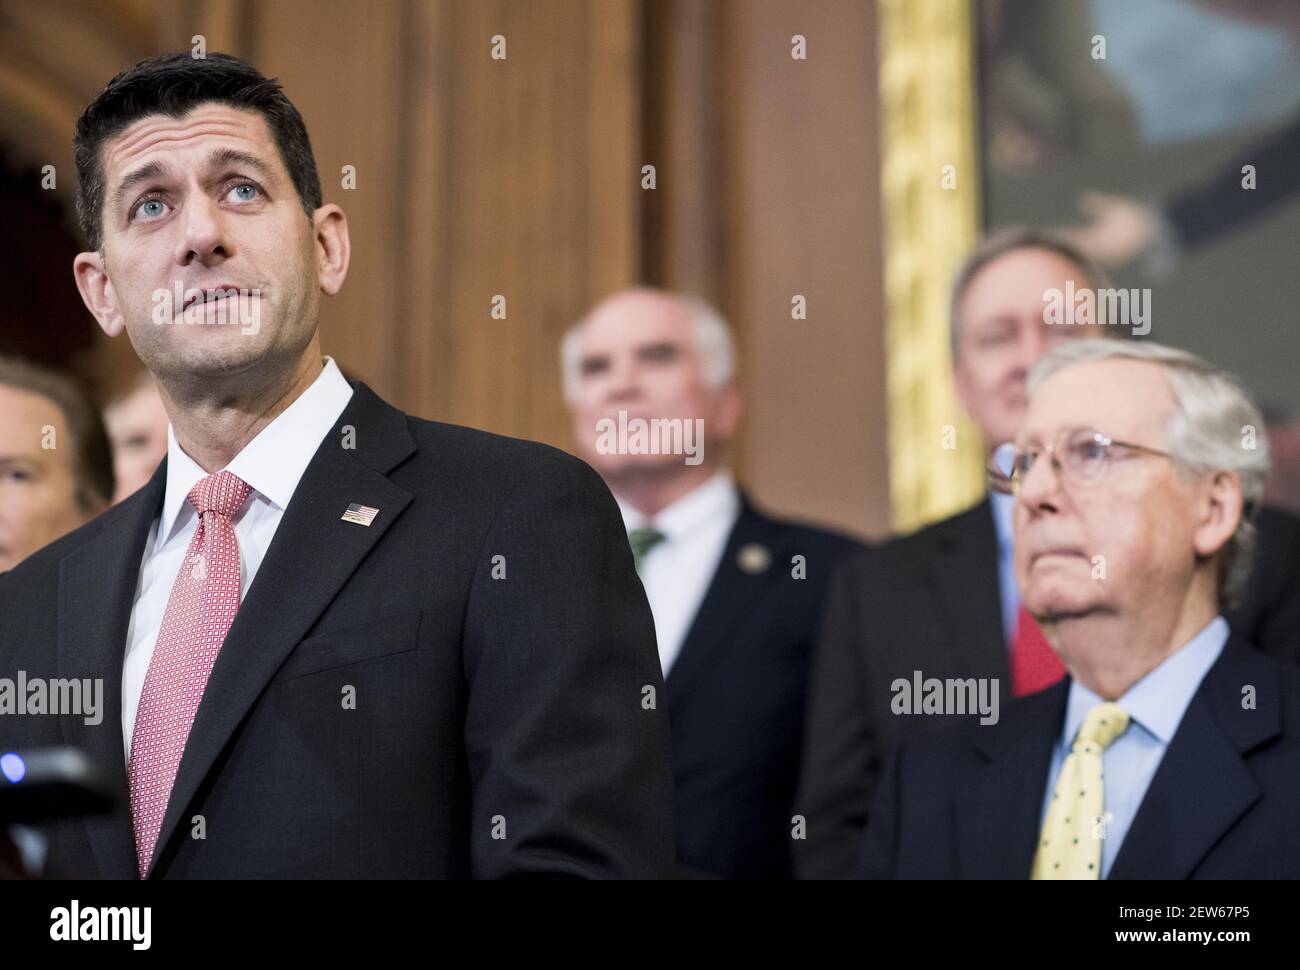 UNITED STATES - SEPTEMBER 27: Speaker of the House Paul Ryan, R-Wisc., left, and Senate Majority Leader Mitch McConnell, R-Ky., lead the Congressional GOP media availability to unveil the GOP tax reform plan in the Capitol on Wednesday, Sept. 27, 2017. (Photo By Bill Clark/CQ Roll Call) Stock Photo